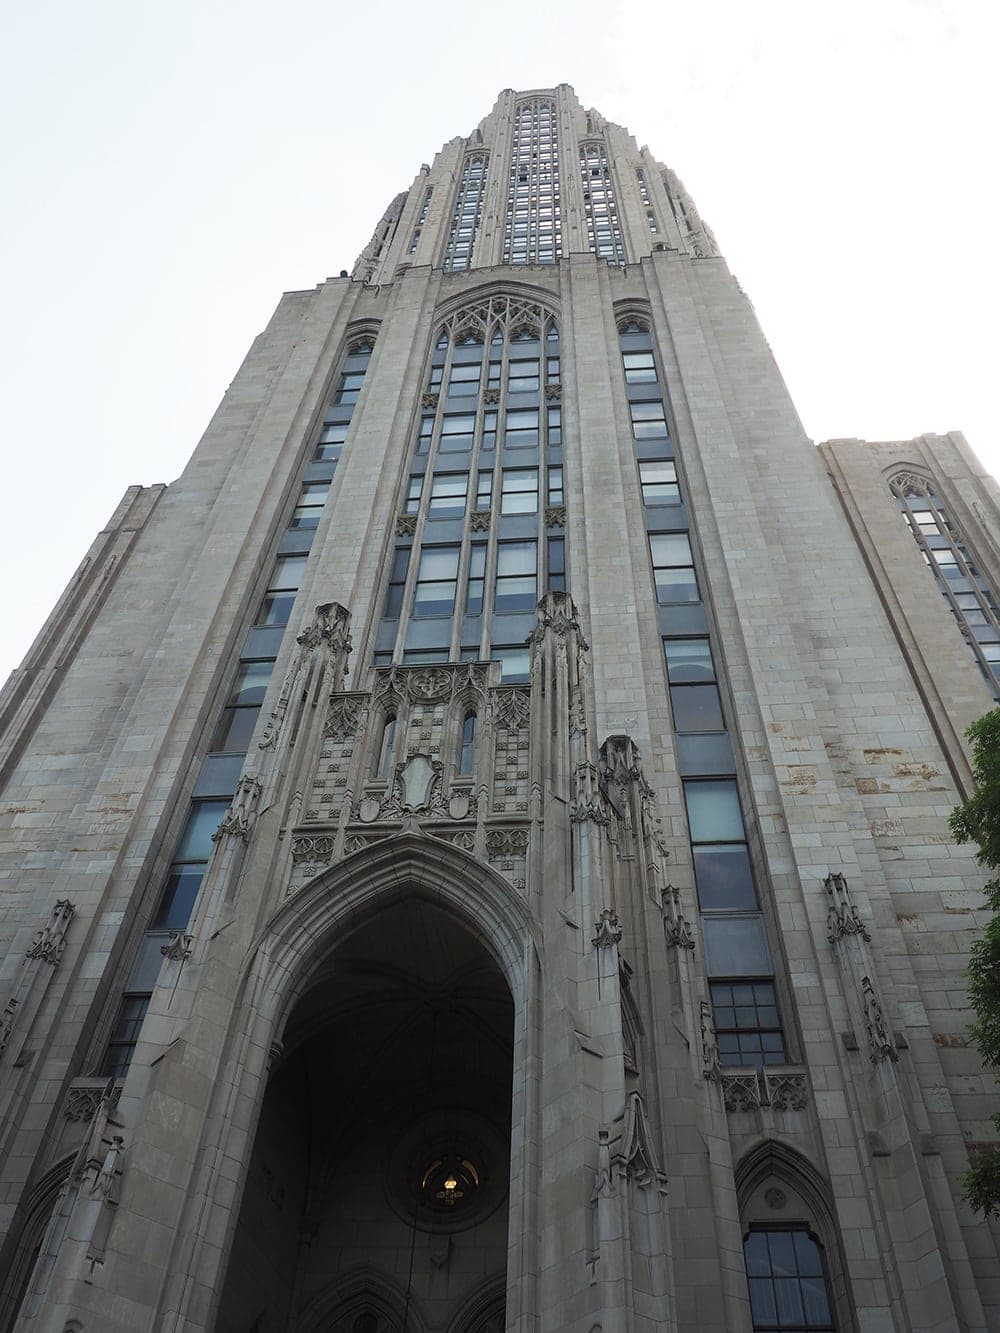 The Cathedral of Learning is the second largest gothic-styled architecture building in the world in Pittsburgh, Pennsylvania. The Cathedral of Learning is on University of Pittsburgh's campus and classes began in the 1930s. | affordable family day trip + places to visit in Pittsburgh, Pennsylvania via Autumn All Along